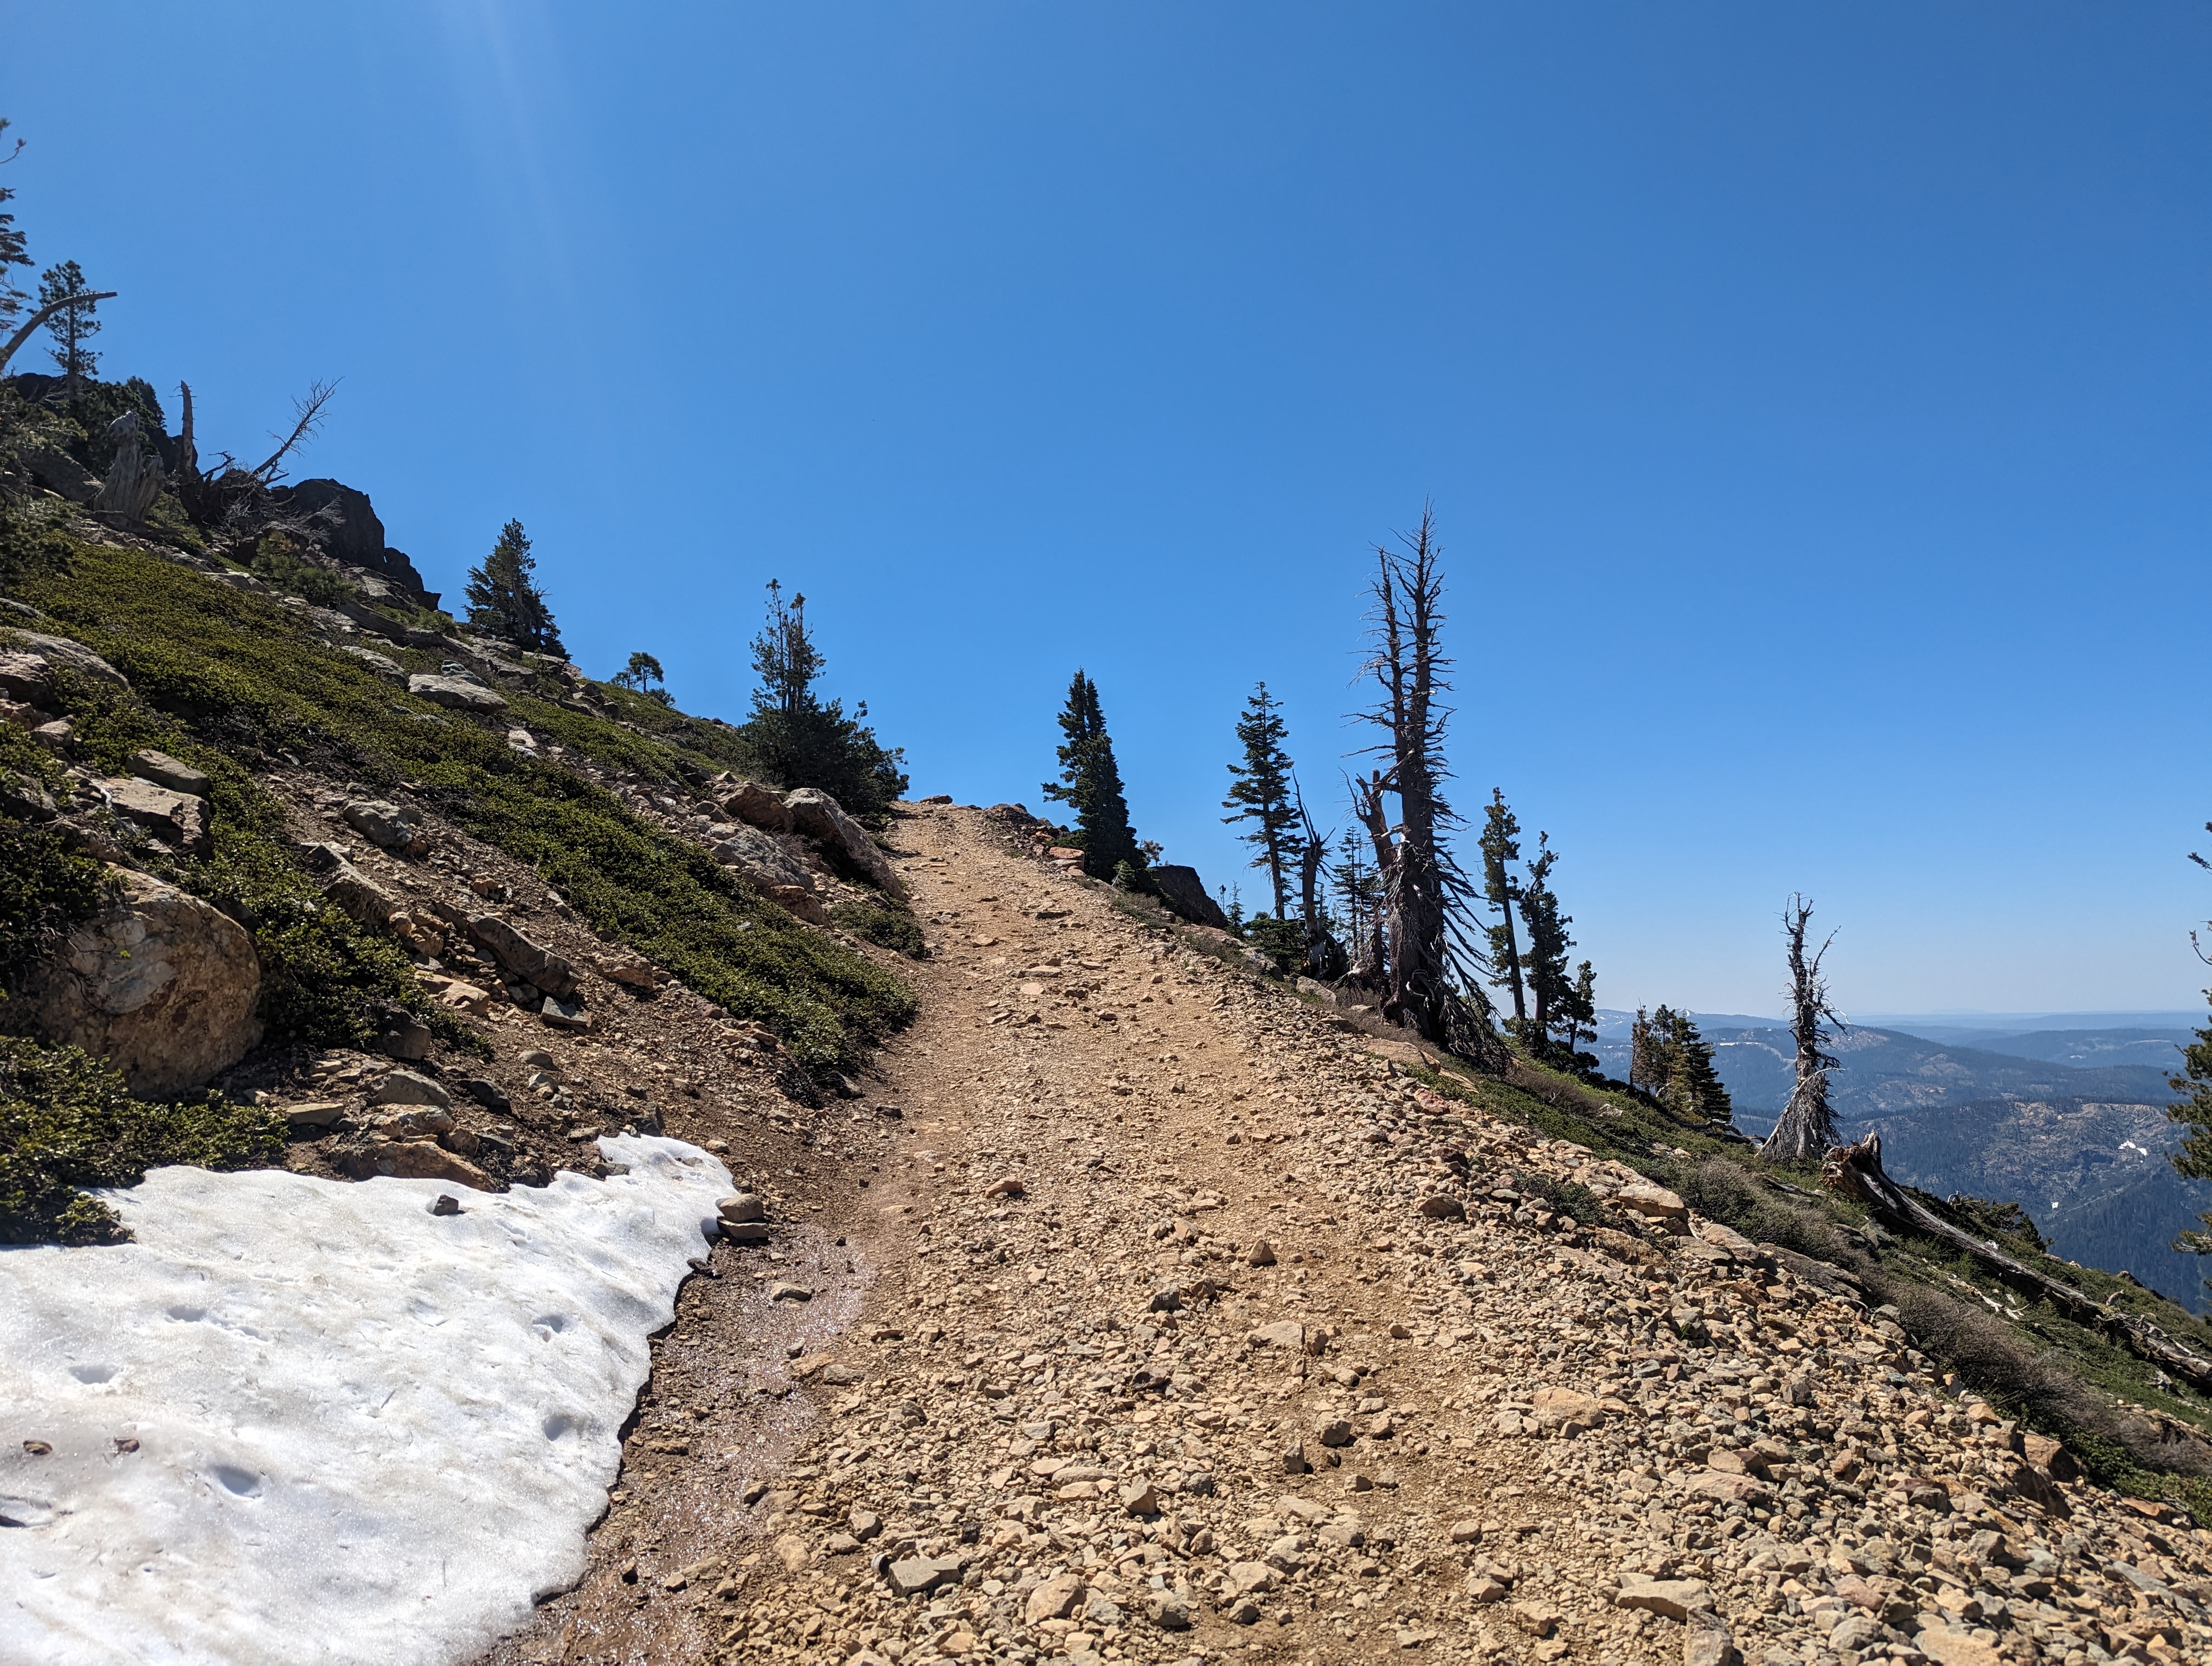 The fire road leading to the summit